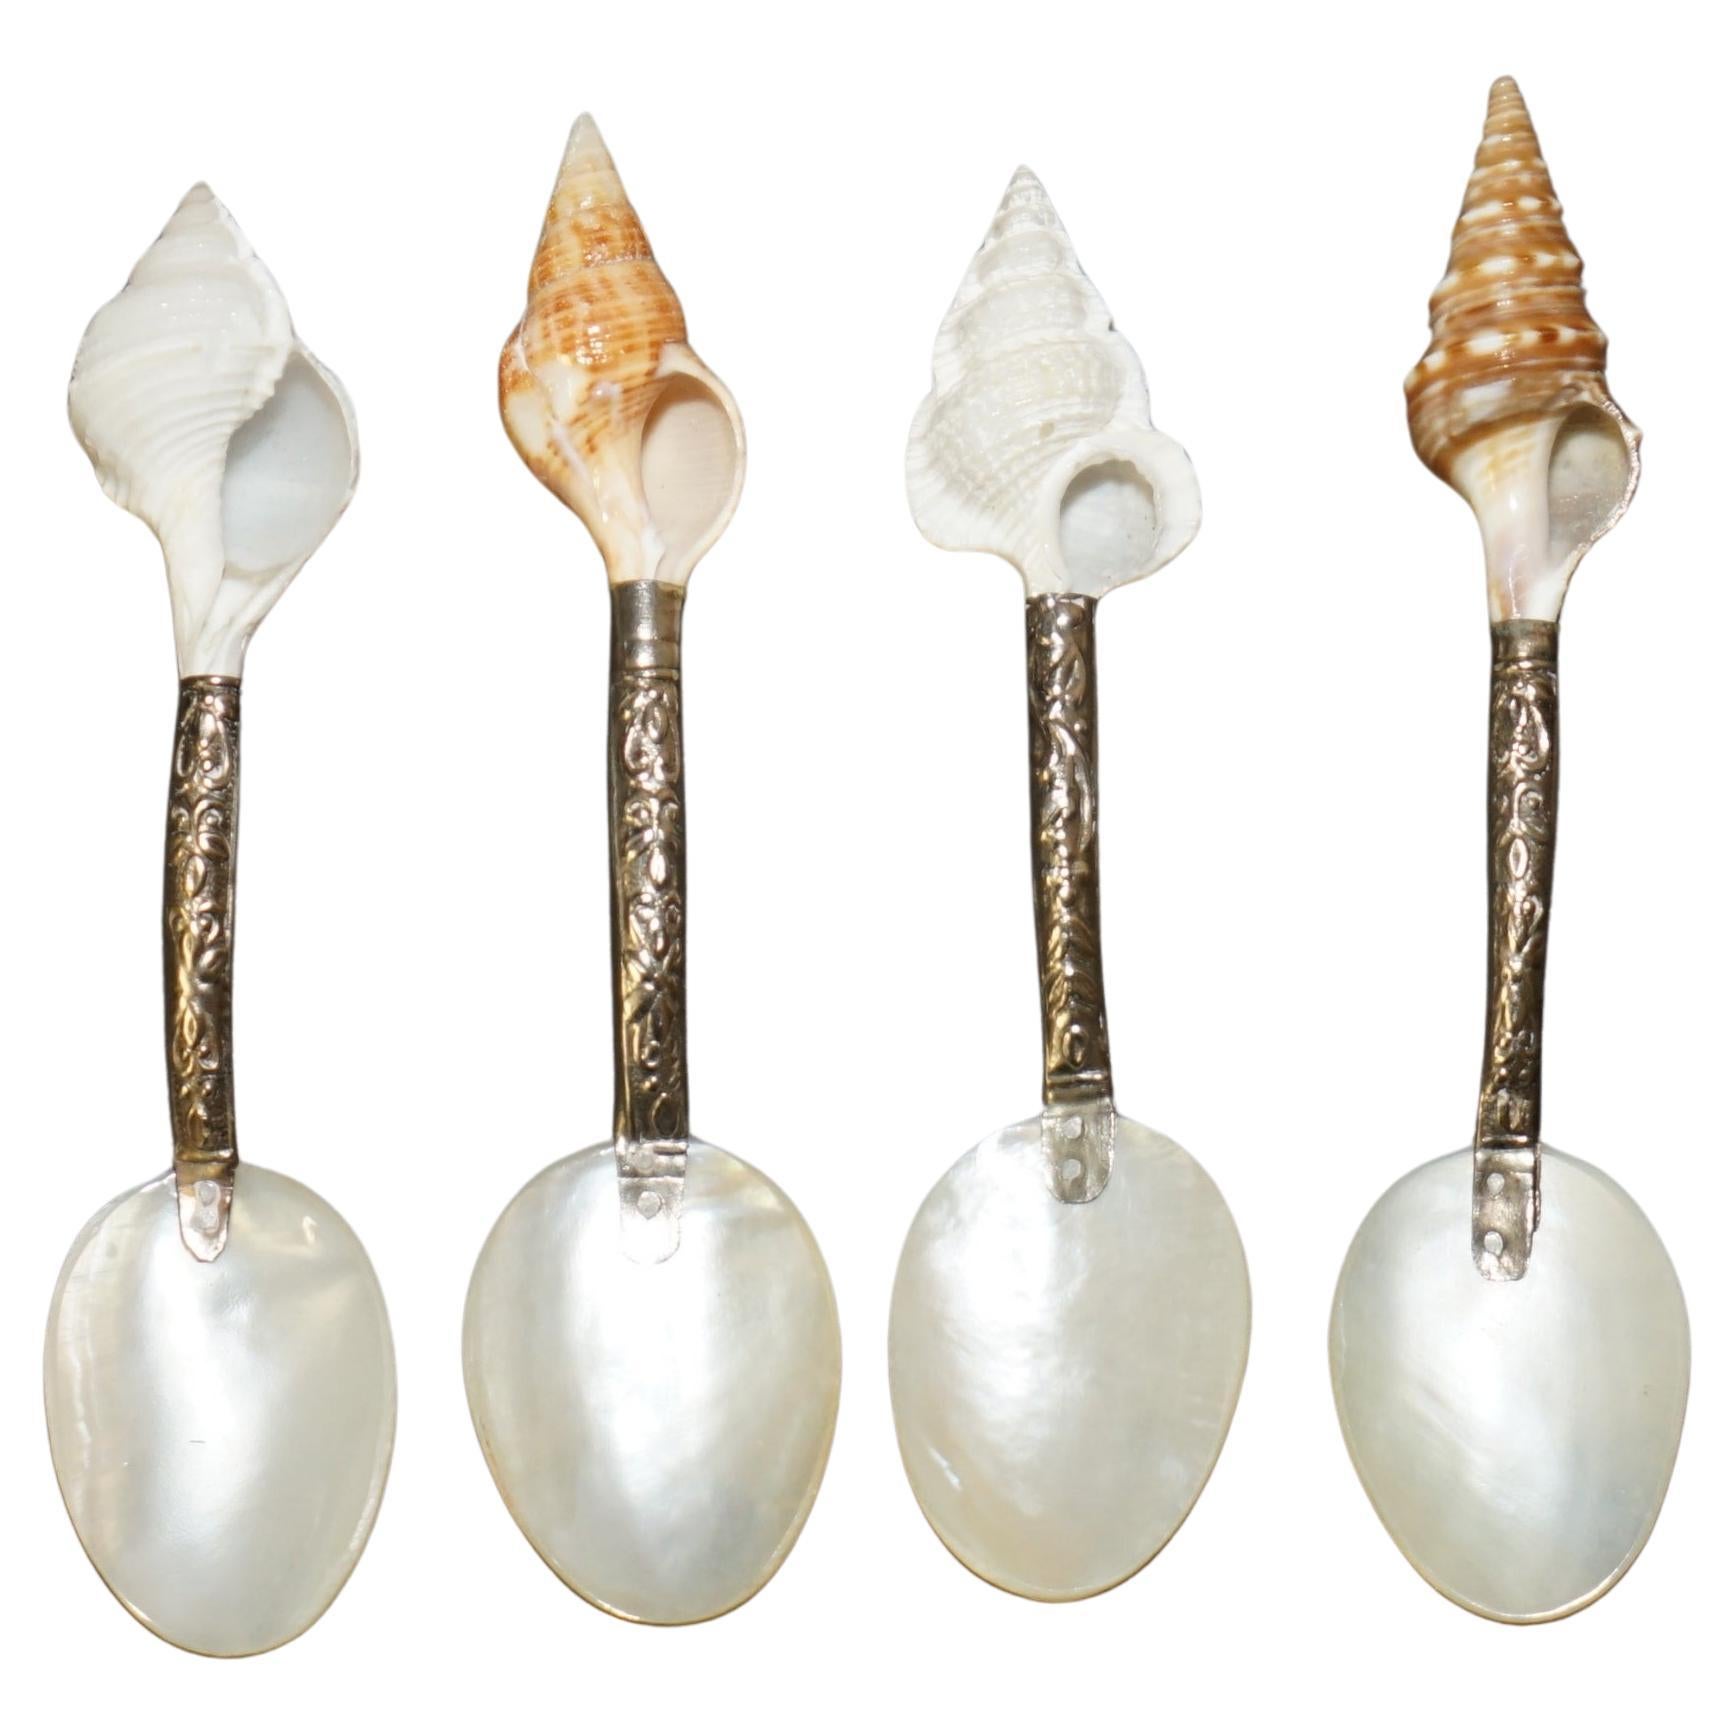 OUR MOUR ViCtorian MOTHER OF PEARL & STERLING SILVER TESTED SHELL TEA SPOONS en vente